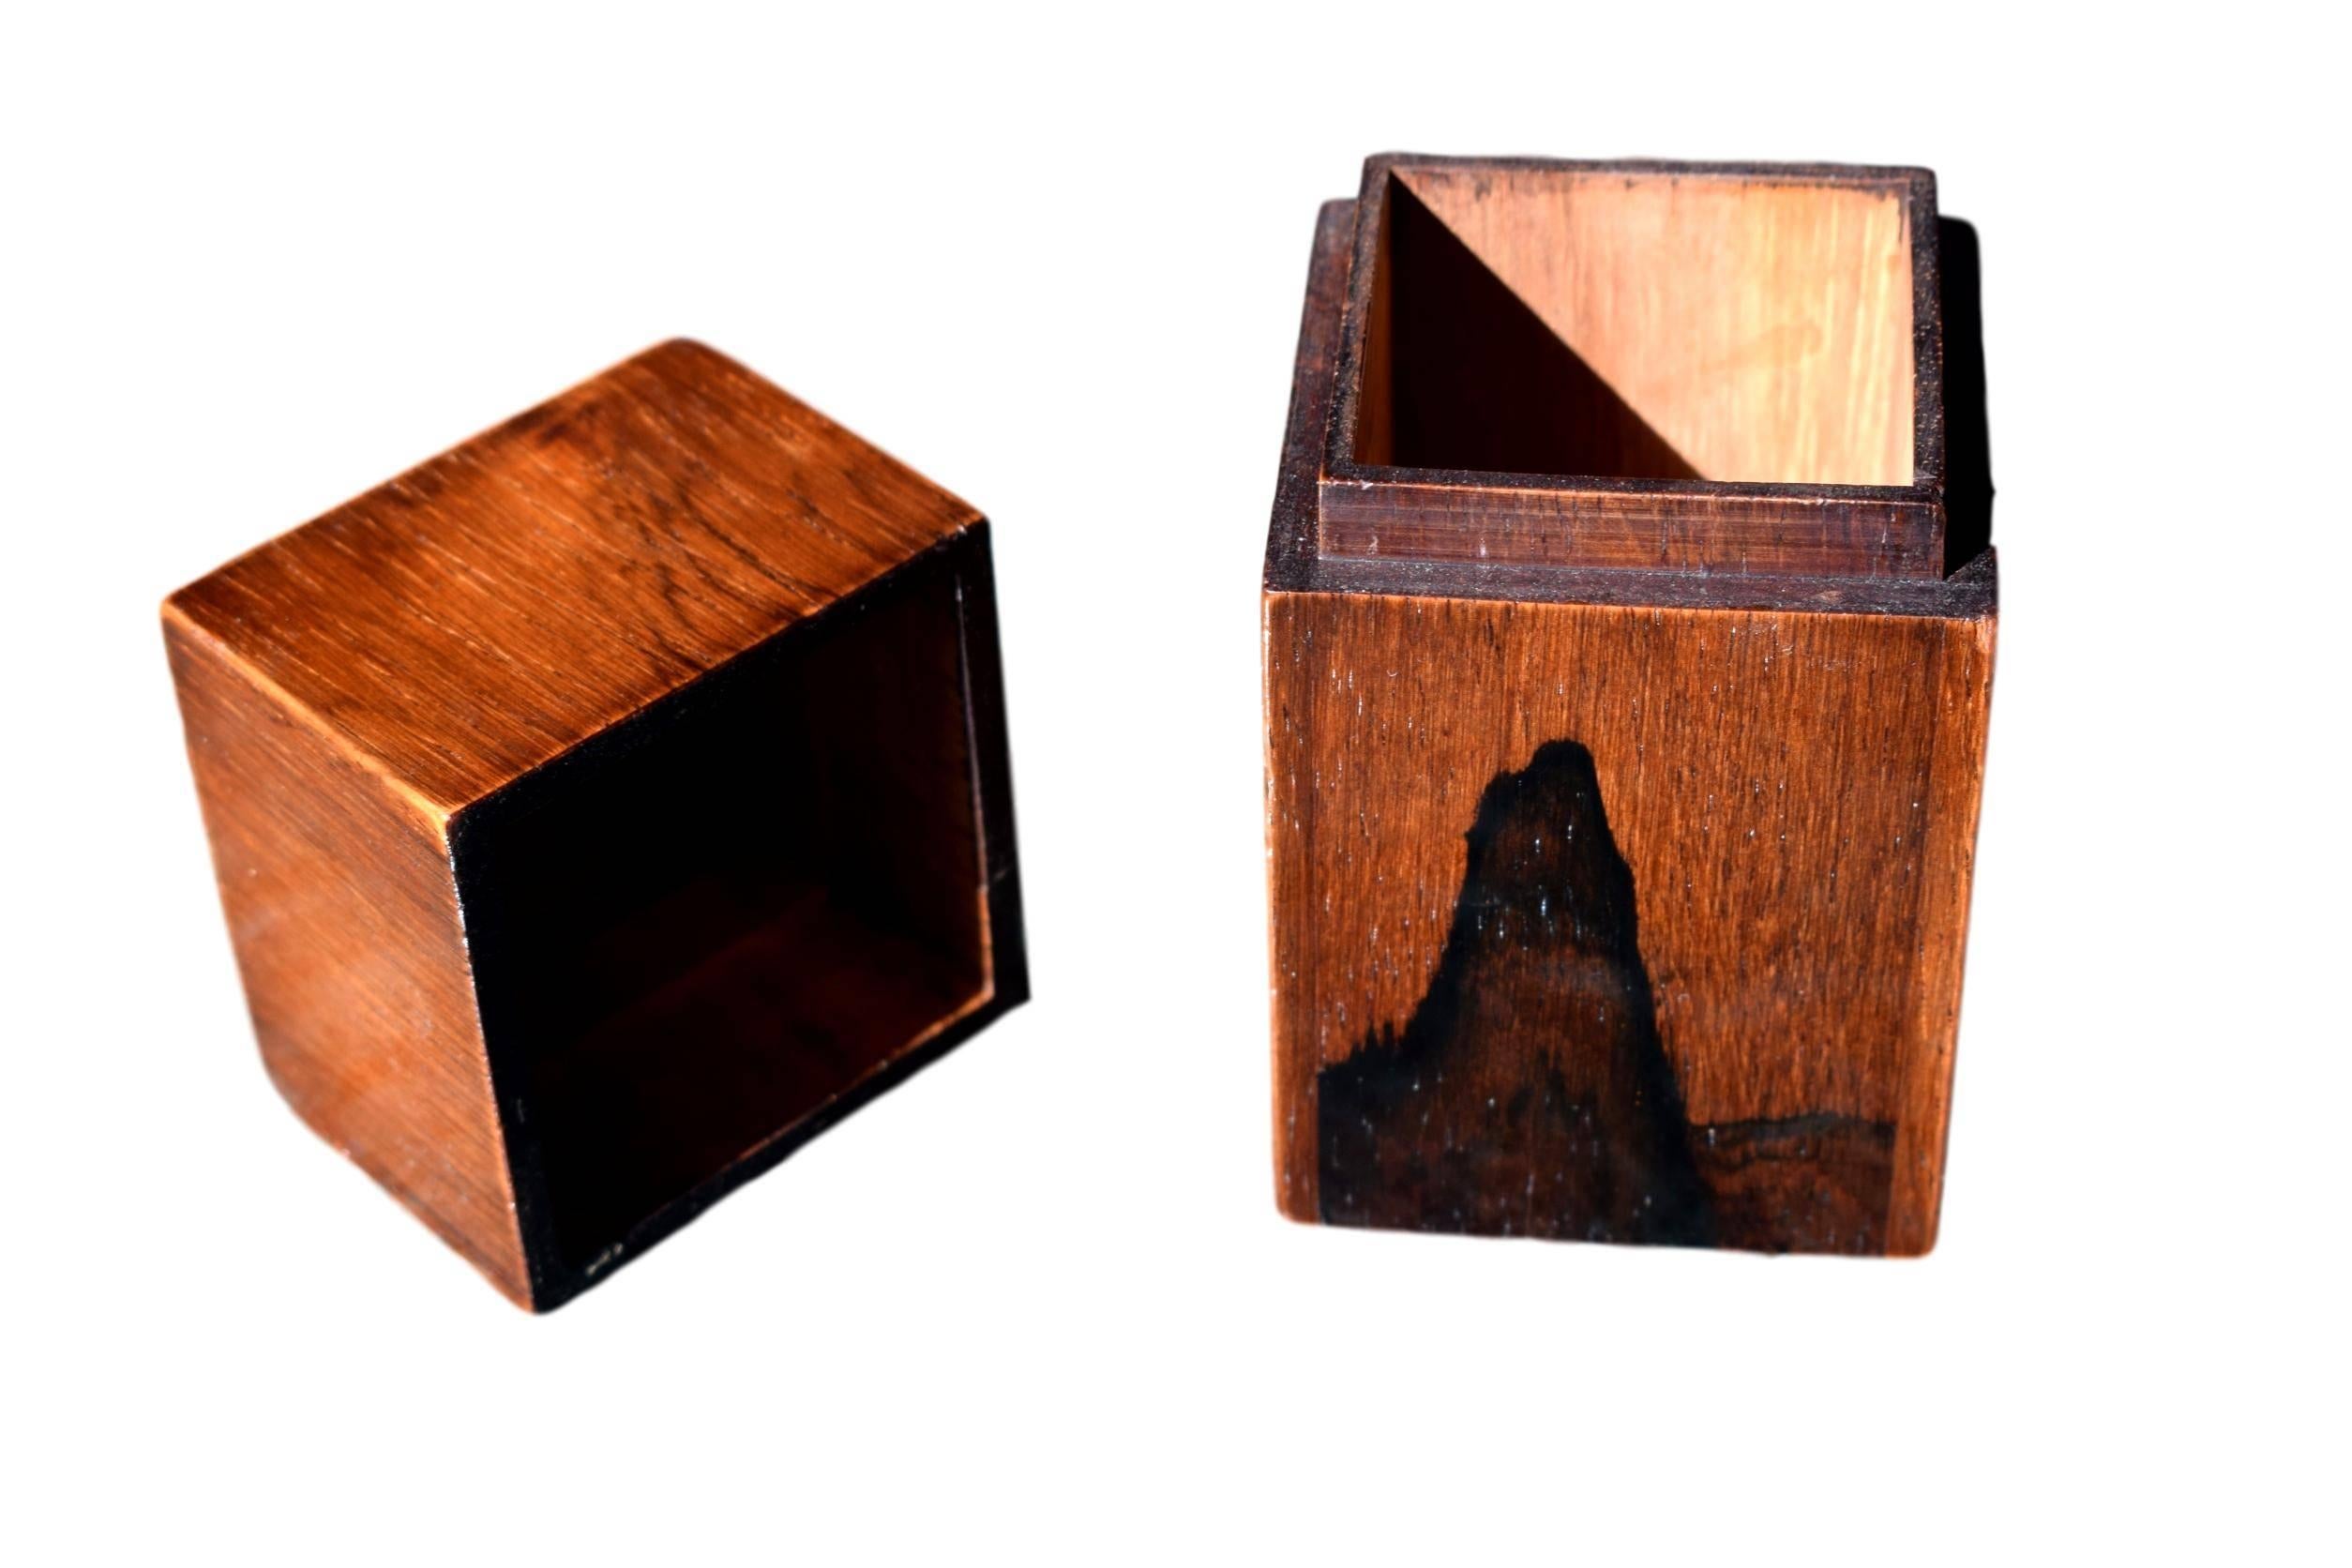 Polychromed Danish Midcentury Rosewood Box by Alfred Klitgaard with Enamel by Bodil Eje For Sale